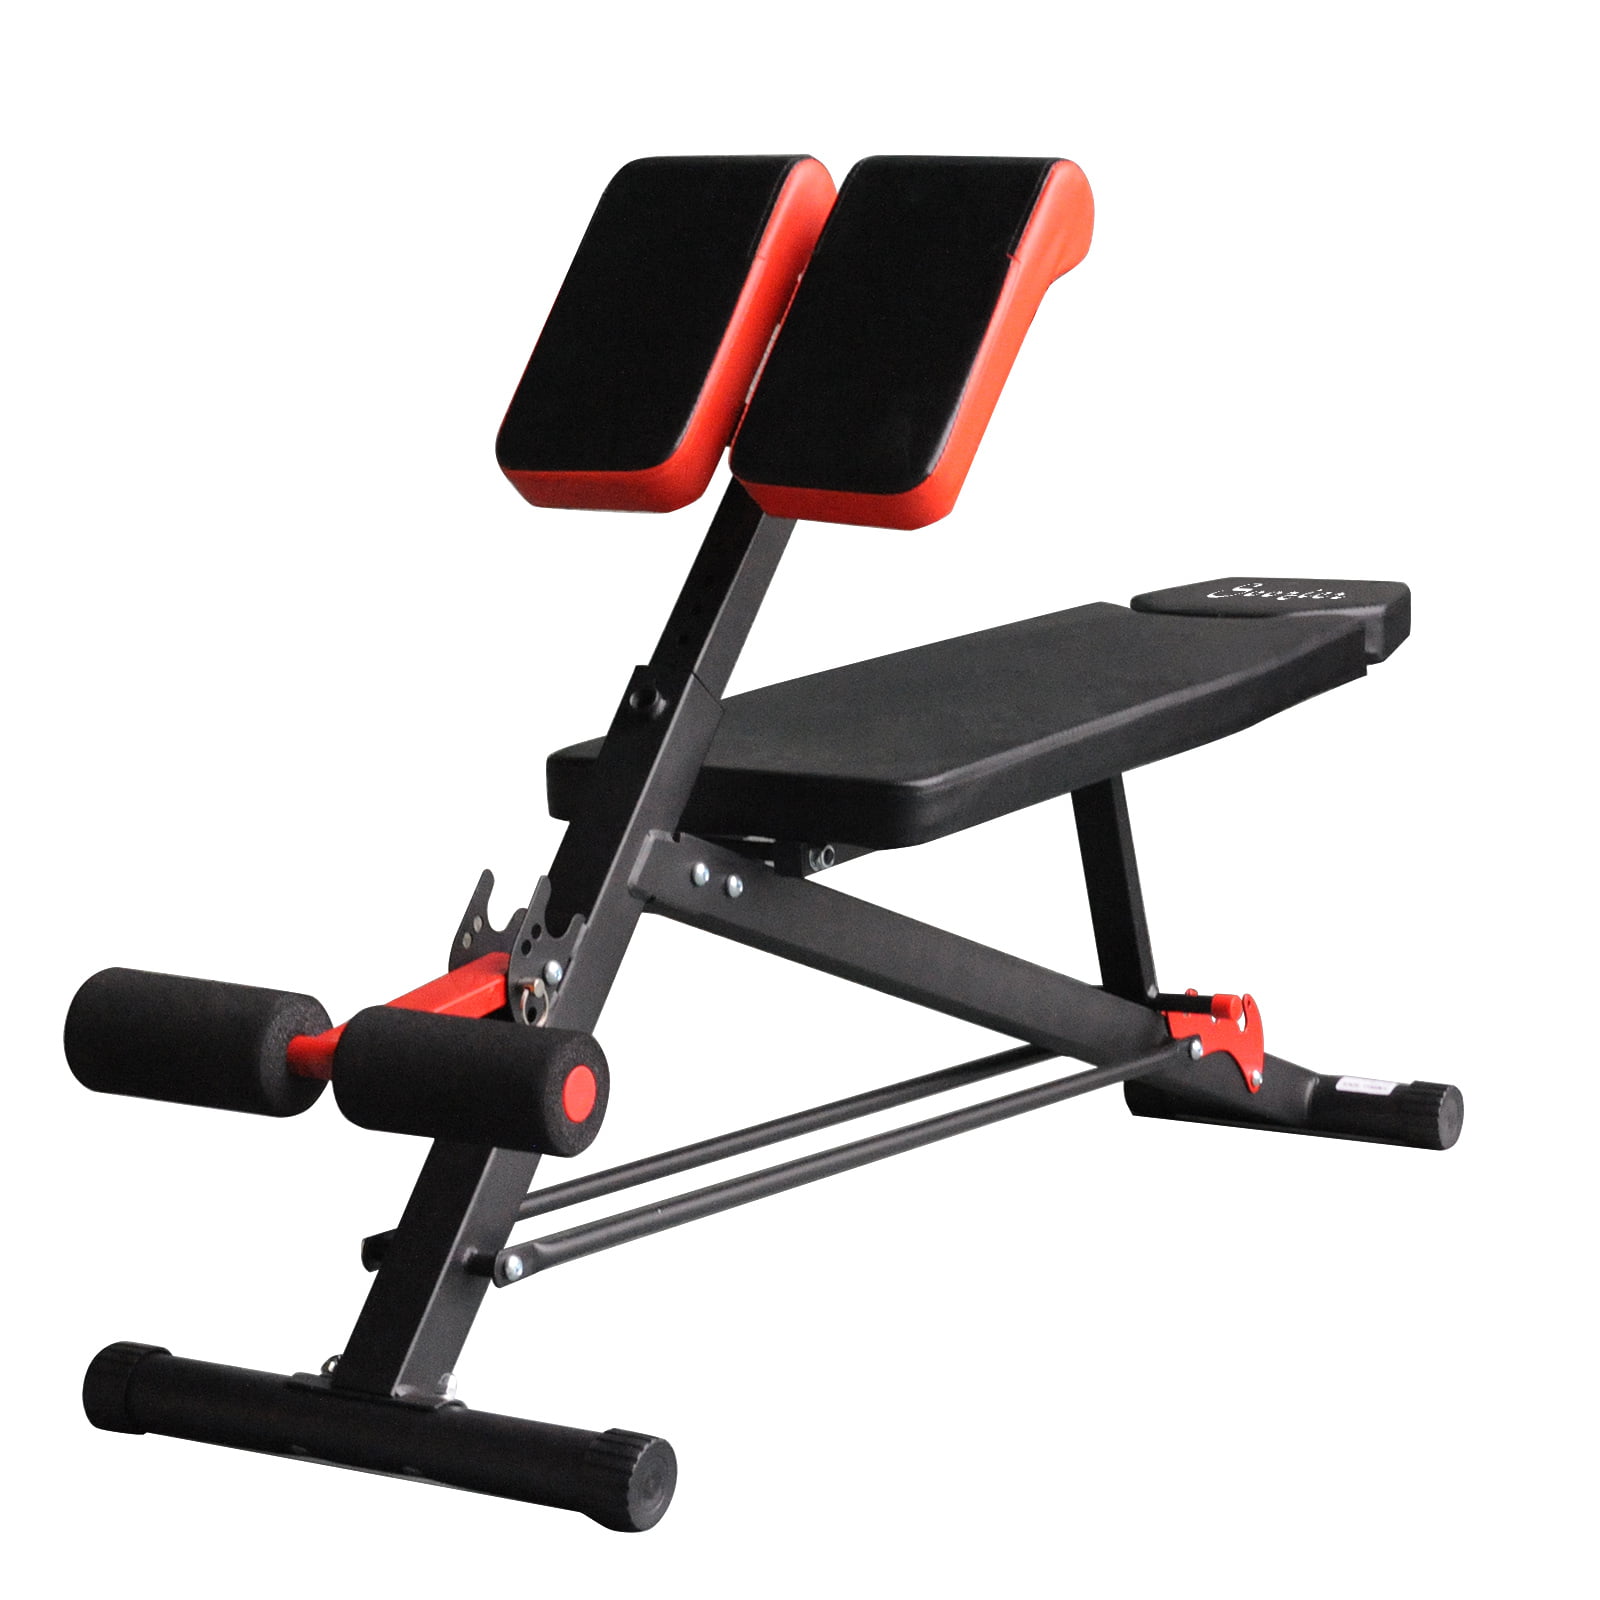 Roman Chair Back Hyperextension Hyper Back Extension,Foldable Adjustable Ab Sit up Bench Decline Bench Flat Bench Crunches Abdominal Muscles Fitness Equipment